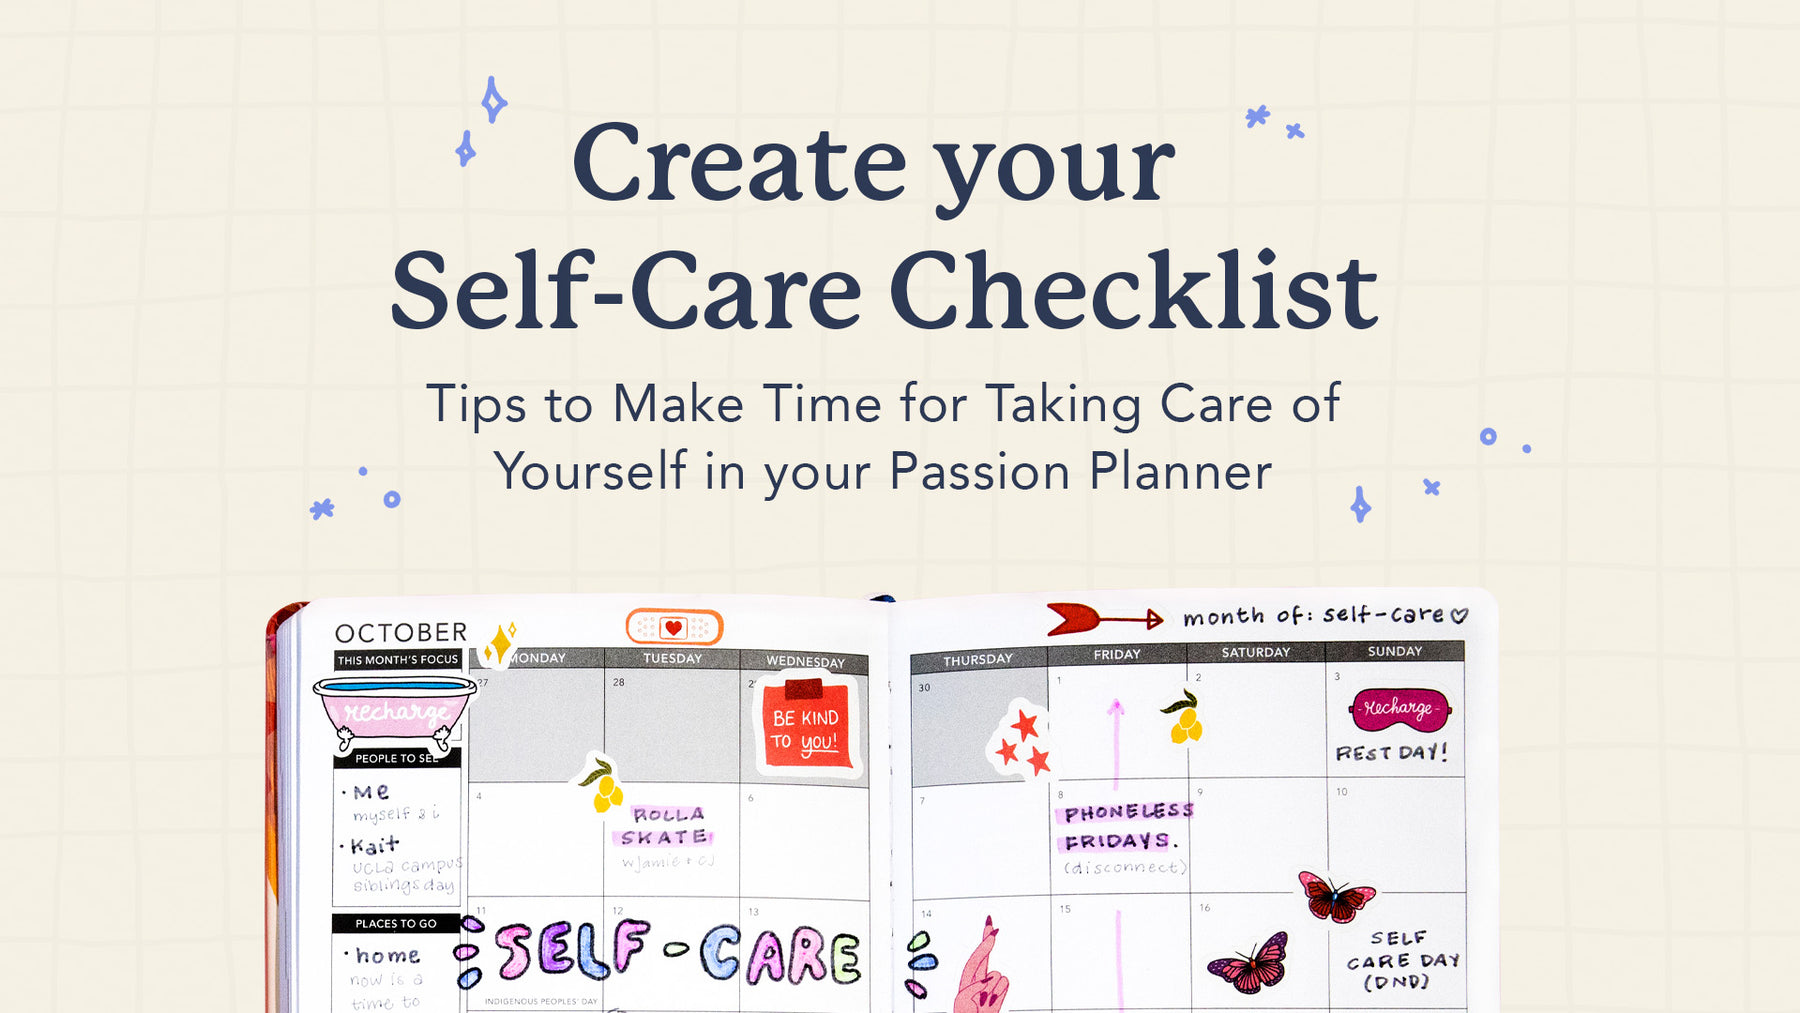 Create Your Self Care Checklist: How to to Make Time for Taking Care of Yourself in Your Passion Planner